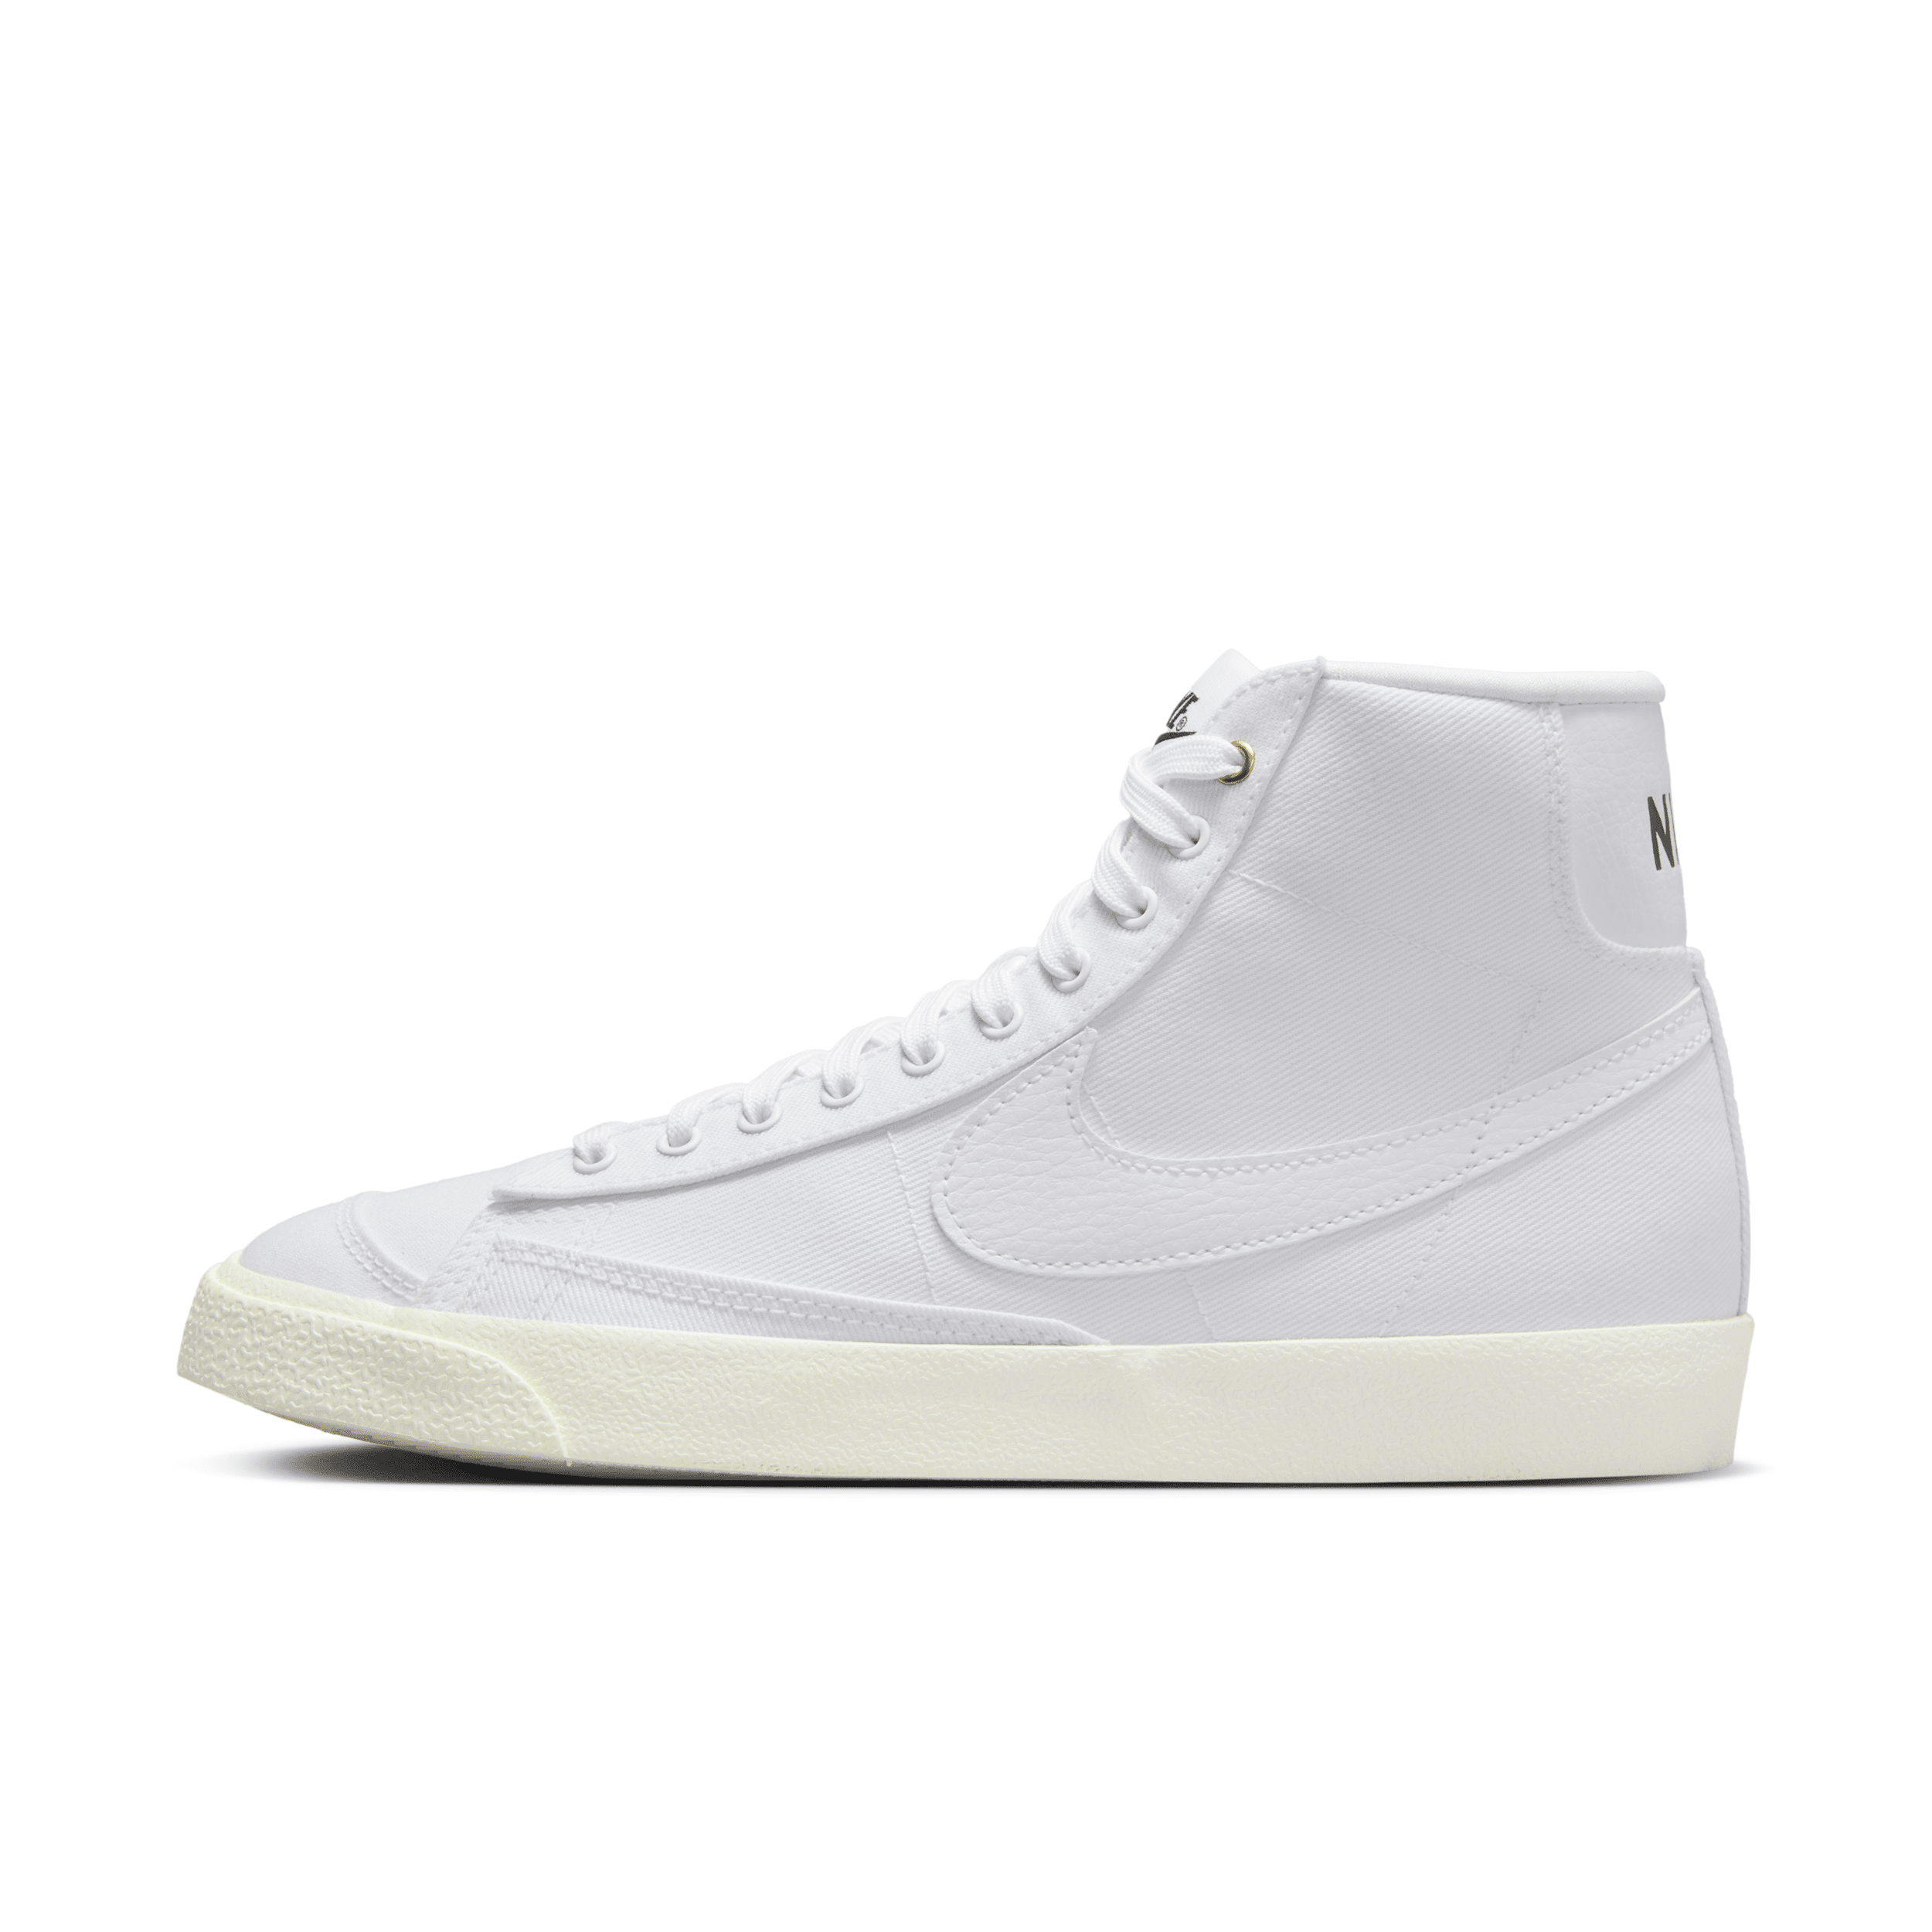 Nike Women's Blazer Mid '77 Canvas Shoes In White